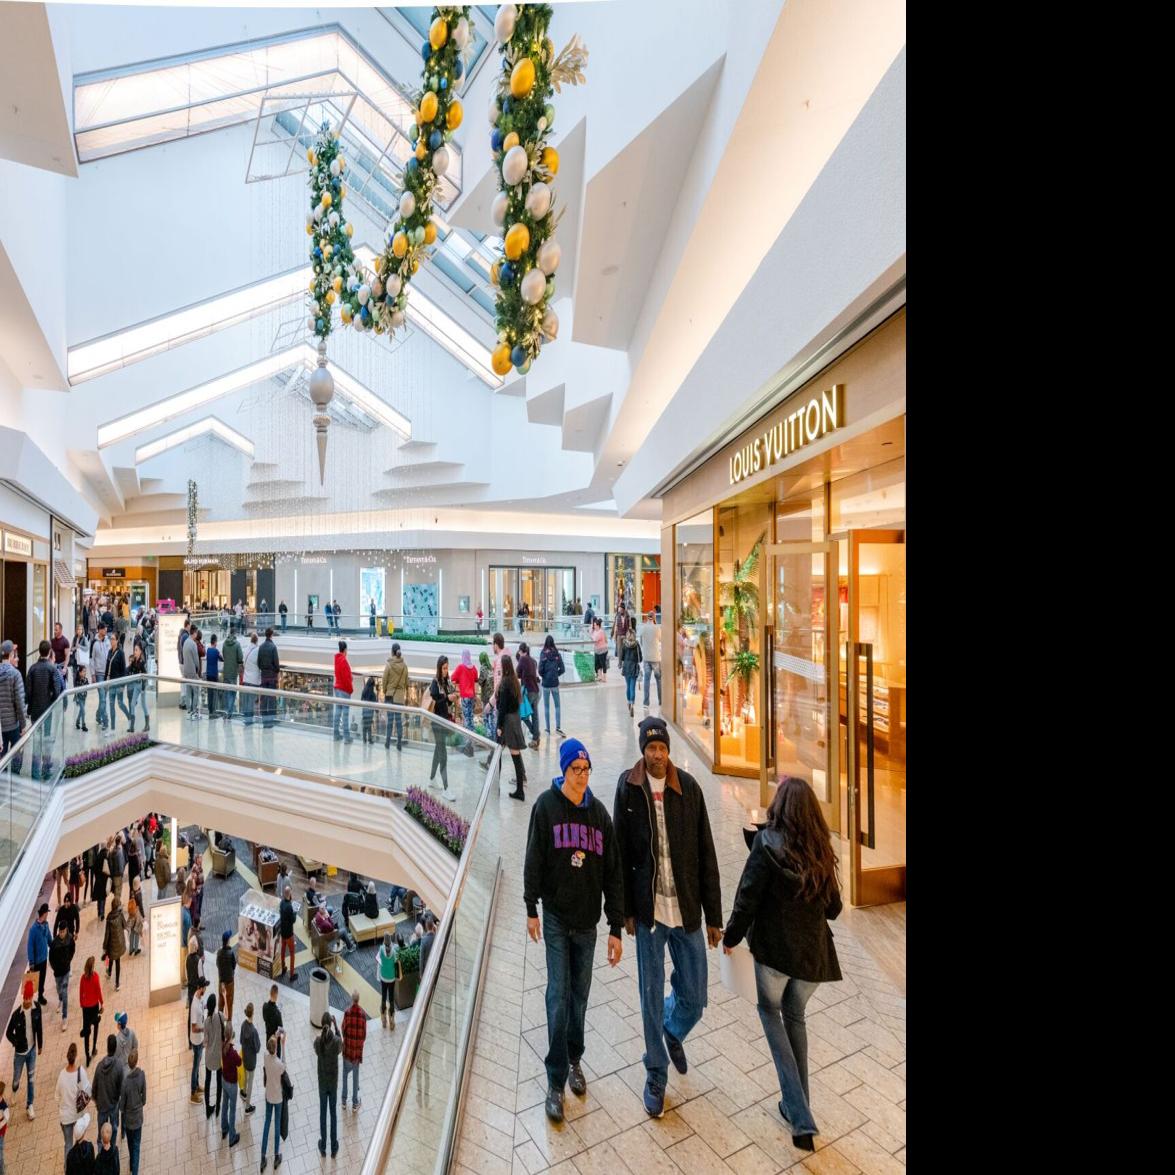 COVID-19: Park Meadows Mall Denver Area Safety Concerns Update